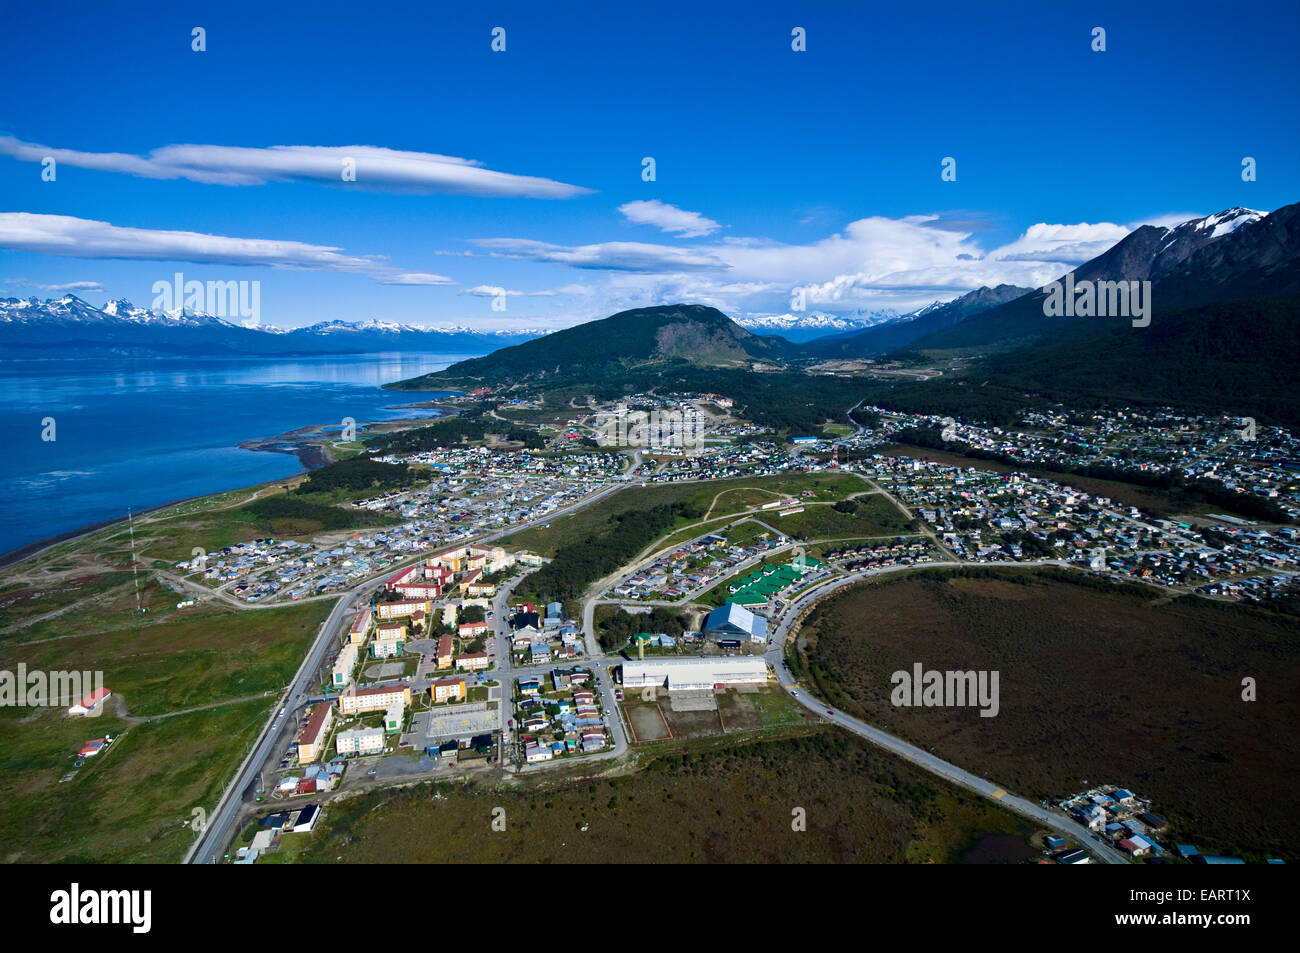 Sprawling suburbs of a city on the forested slopes of the Andes. Stock Photo